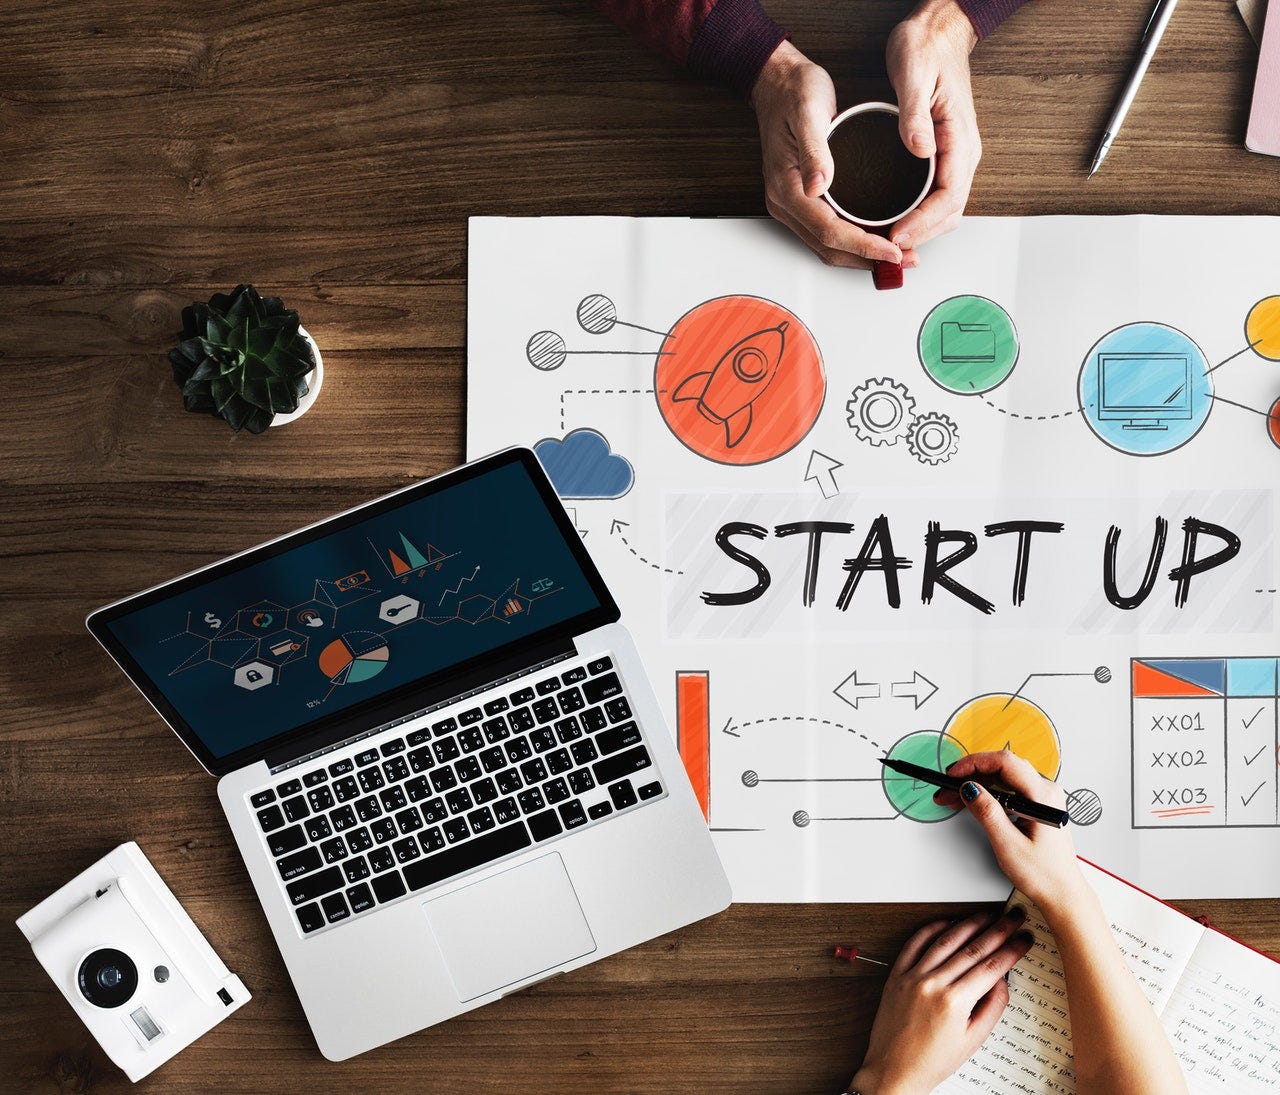 what online business should I start - starting an e-commerce business overhead image of a laptop open on the table with a large sheet of paper that says "start up" showing all of the planning that goes into starting a business